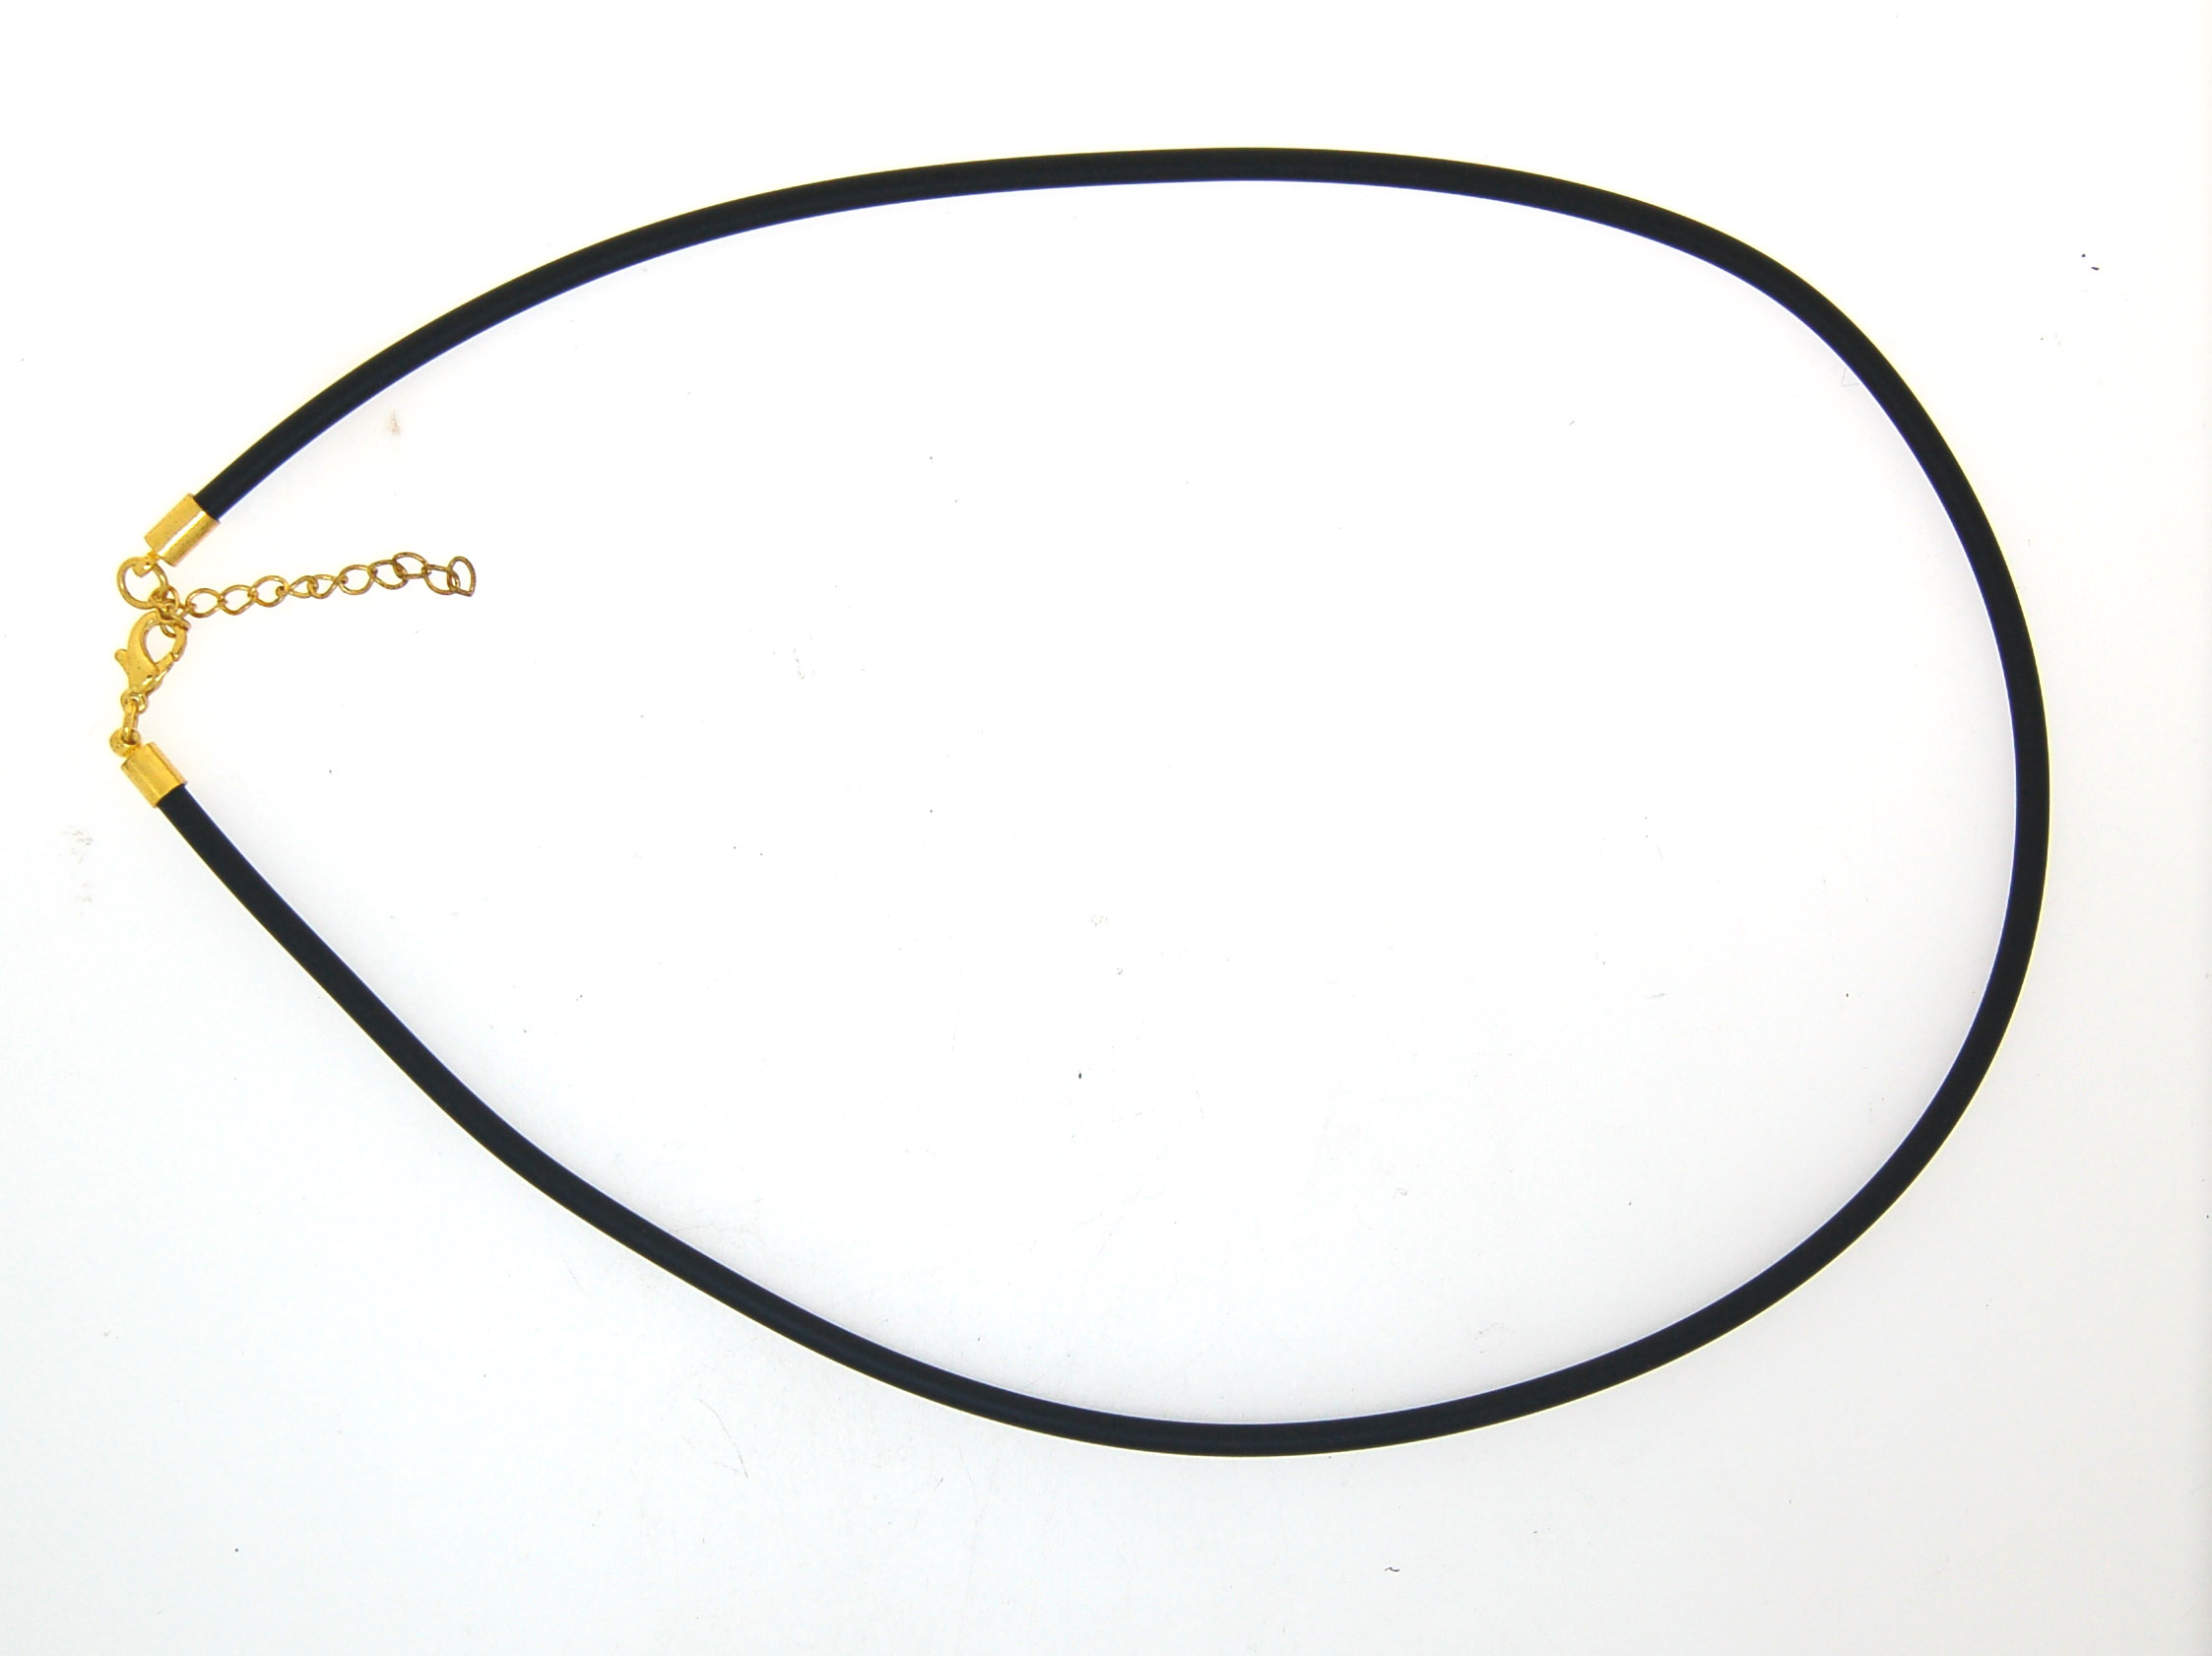 Neoprene Choker 2mm with Gold Plate Parrot Clasp (Copy)